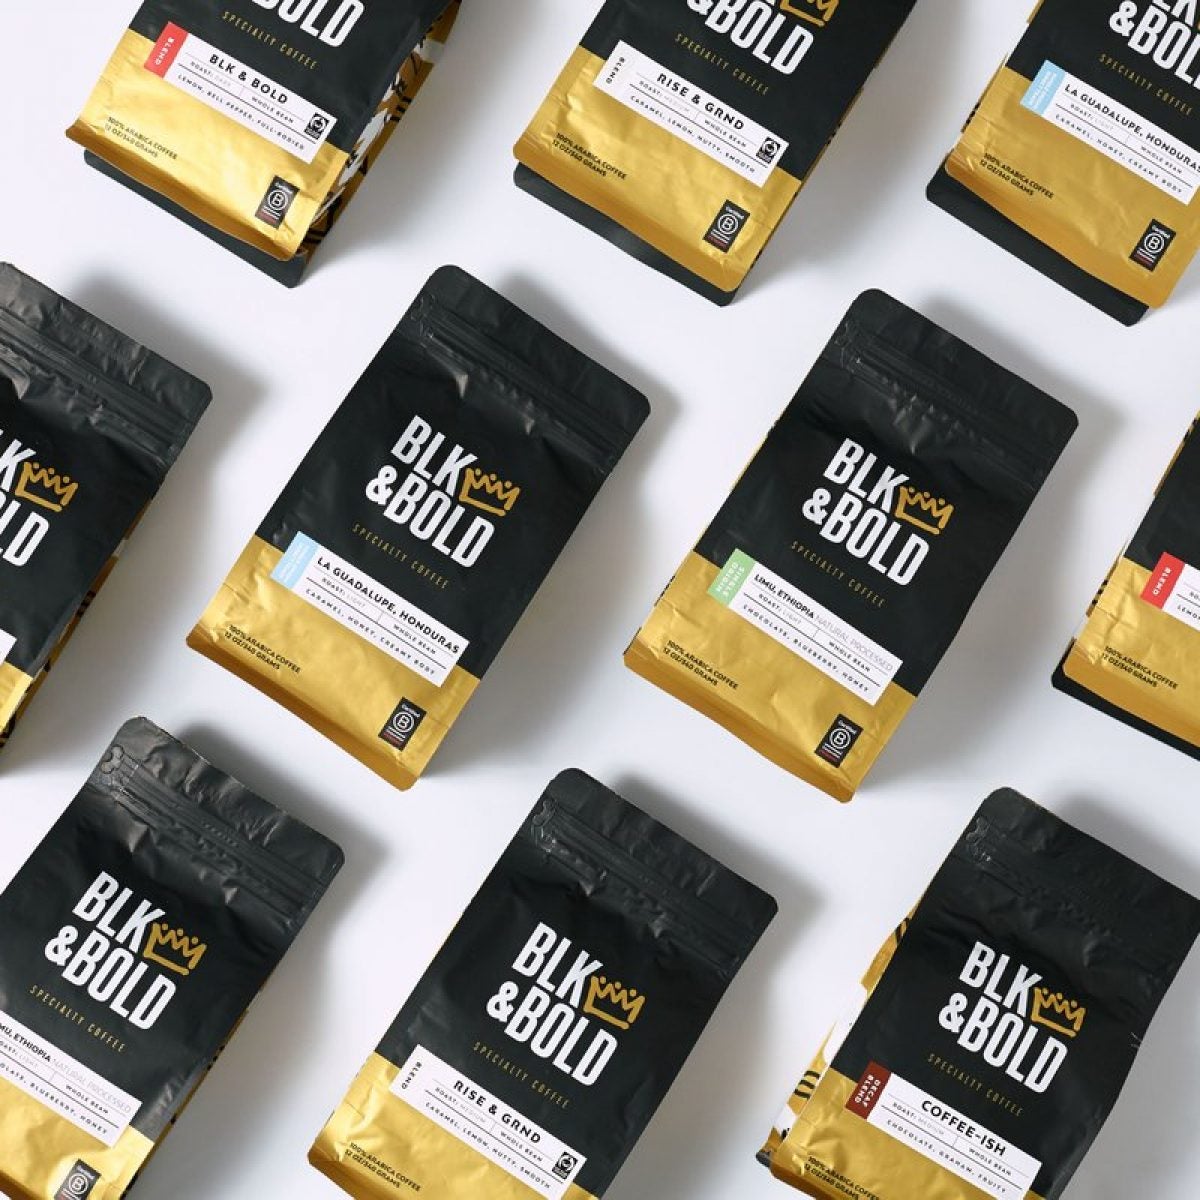 9 Black-Owned Coffee Brands To Add To Your Pantry On National Coffee Day